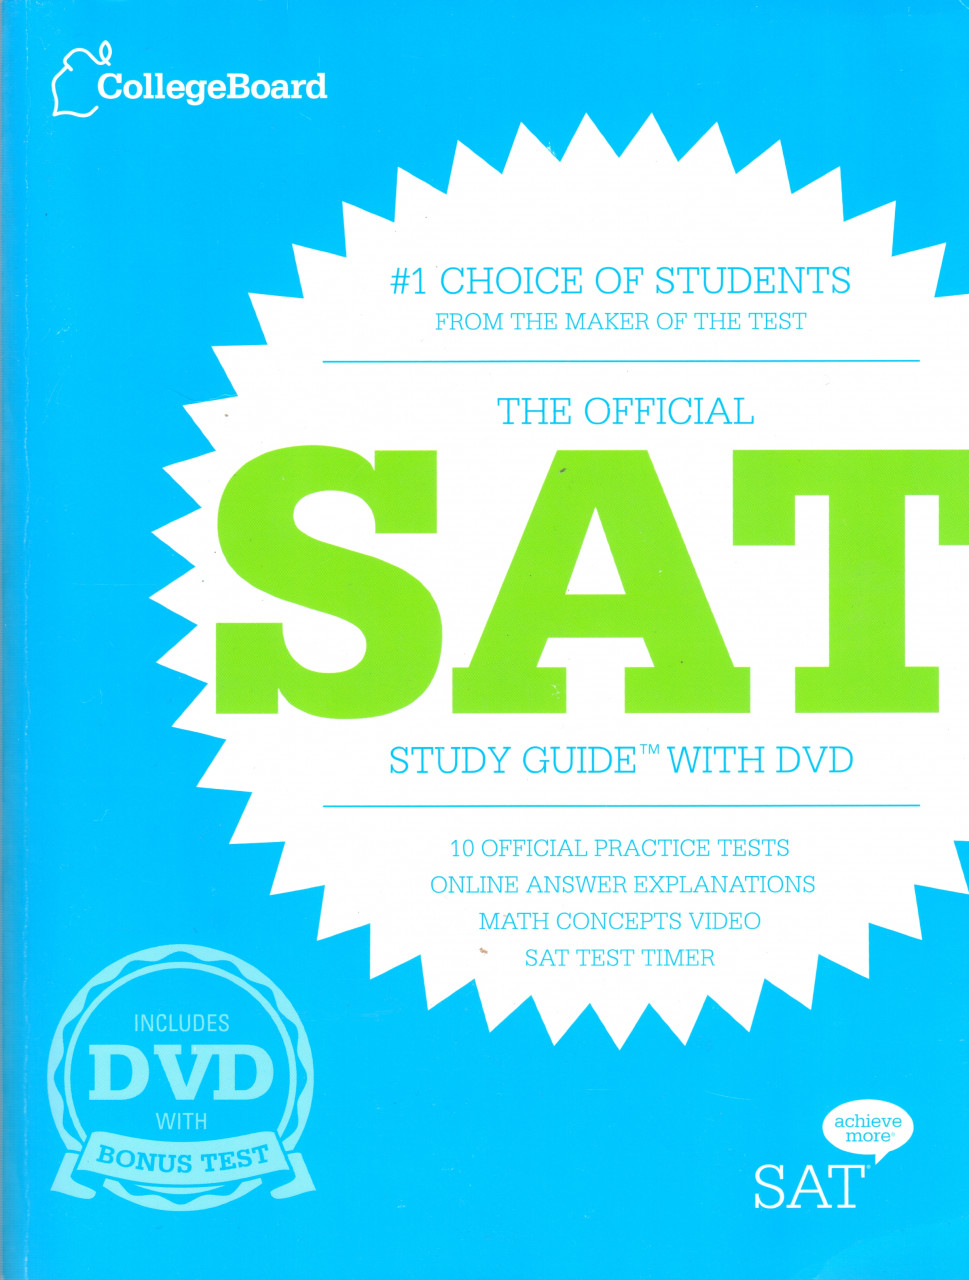 The official SAT study guide with DVD